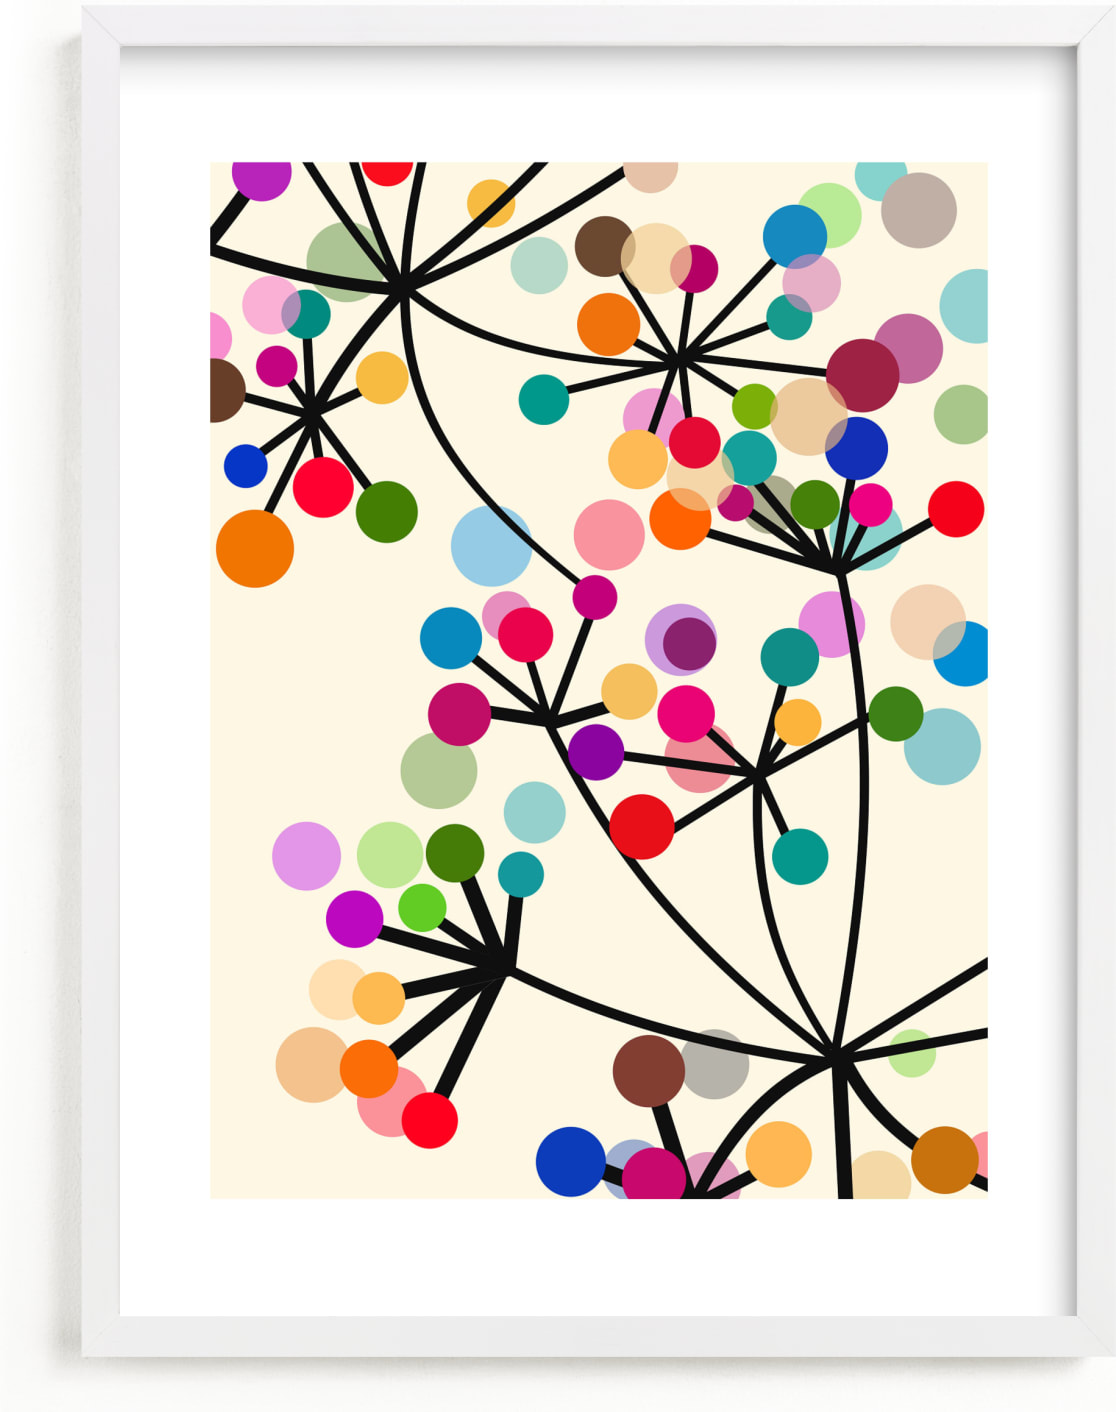 This is a blue kids wall art by Angel Estevez called Flowering Tree.